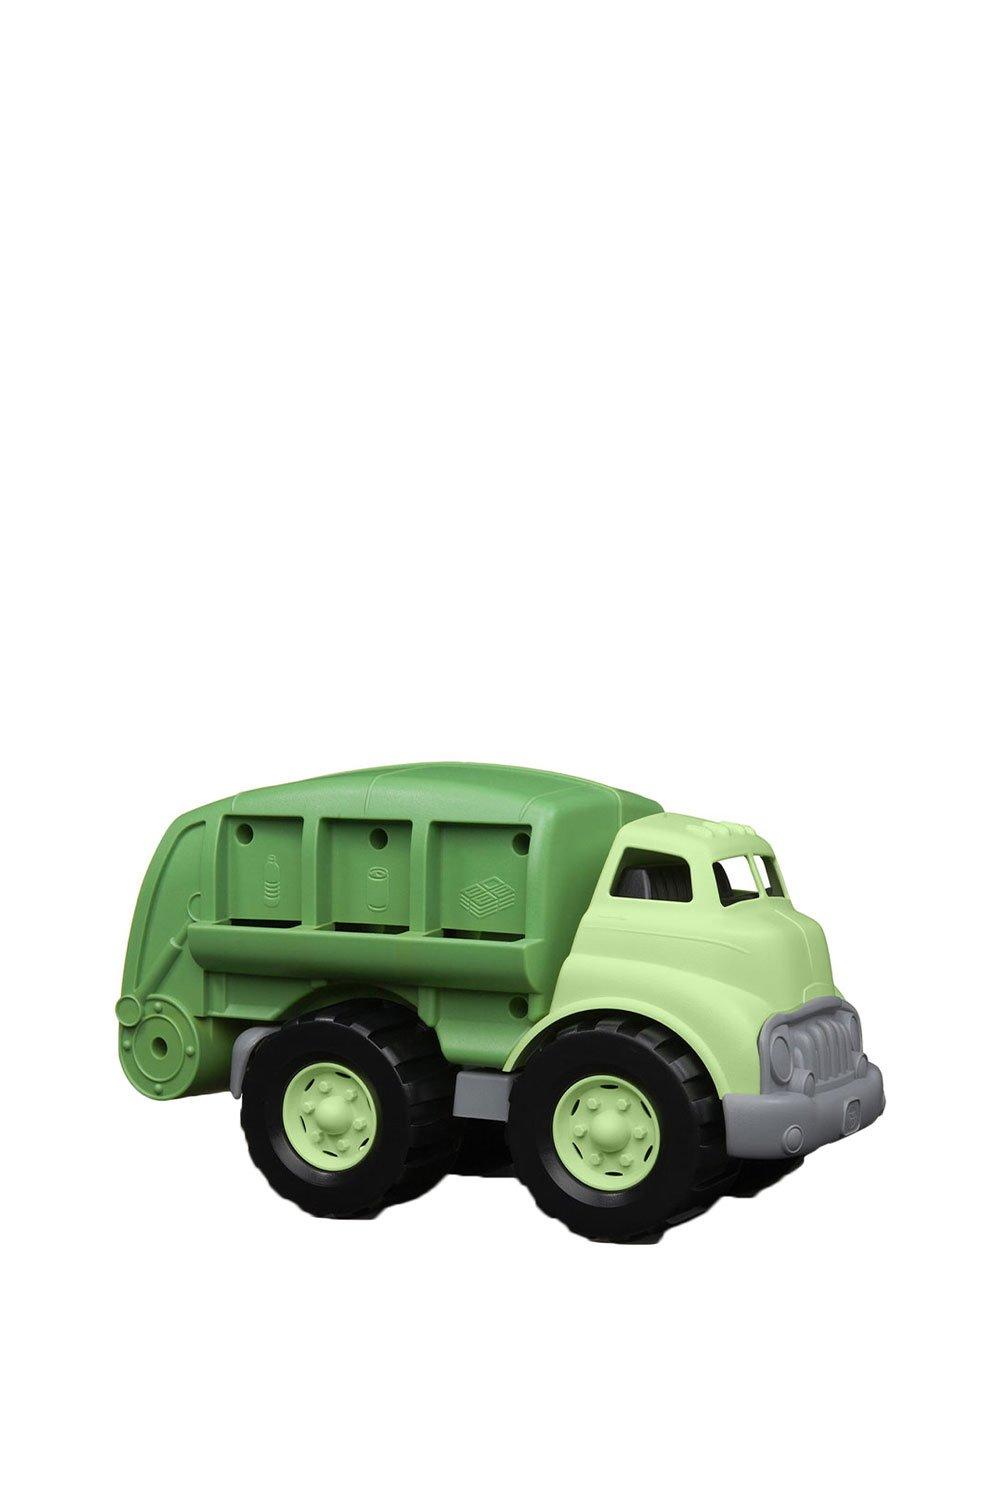 Green Toys Recycle Truck|pale green